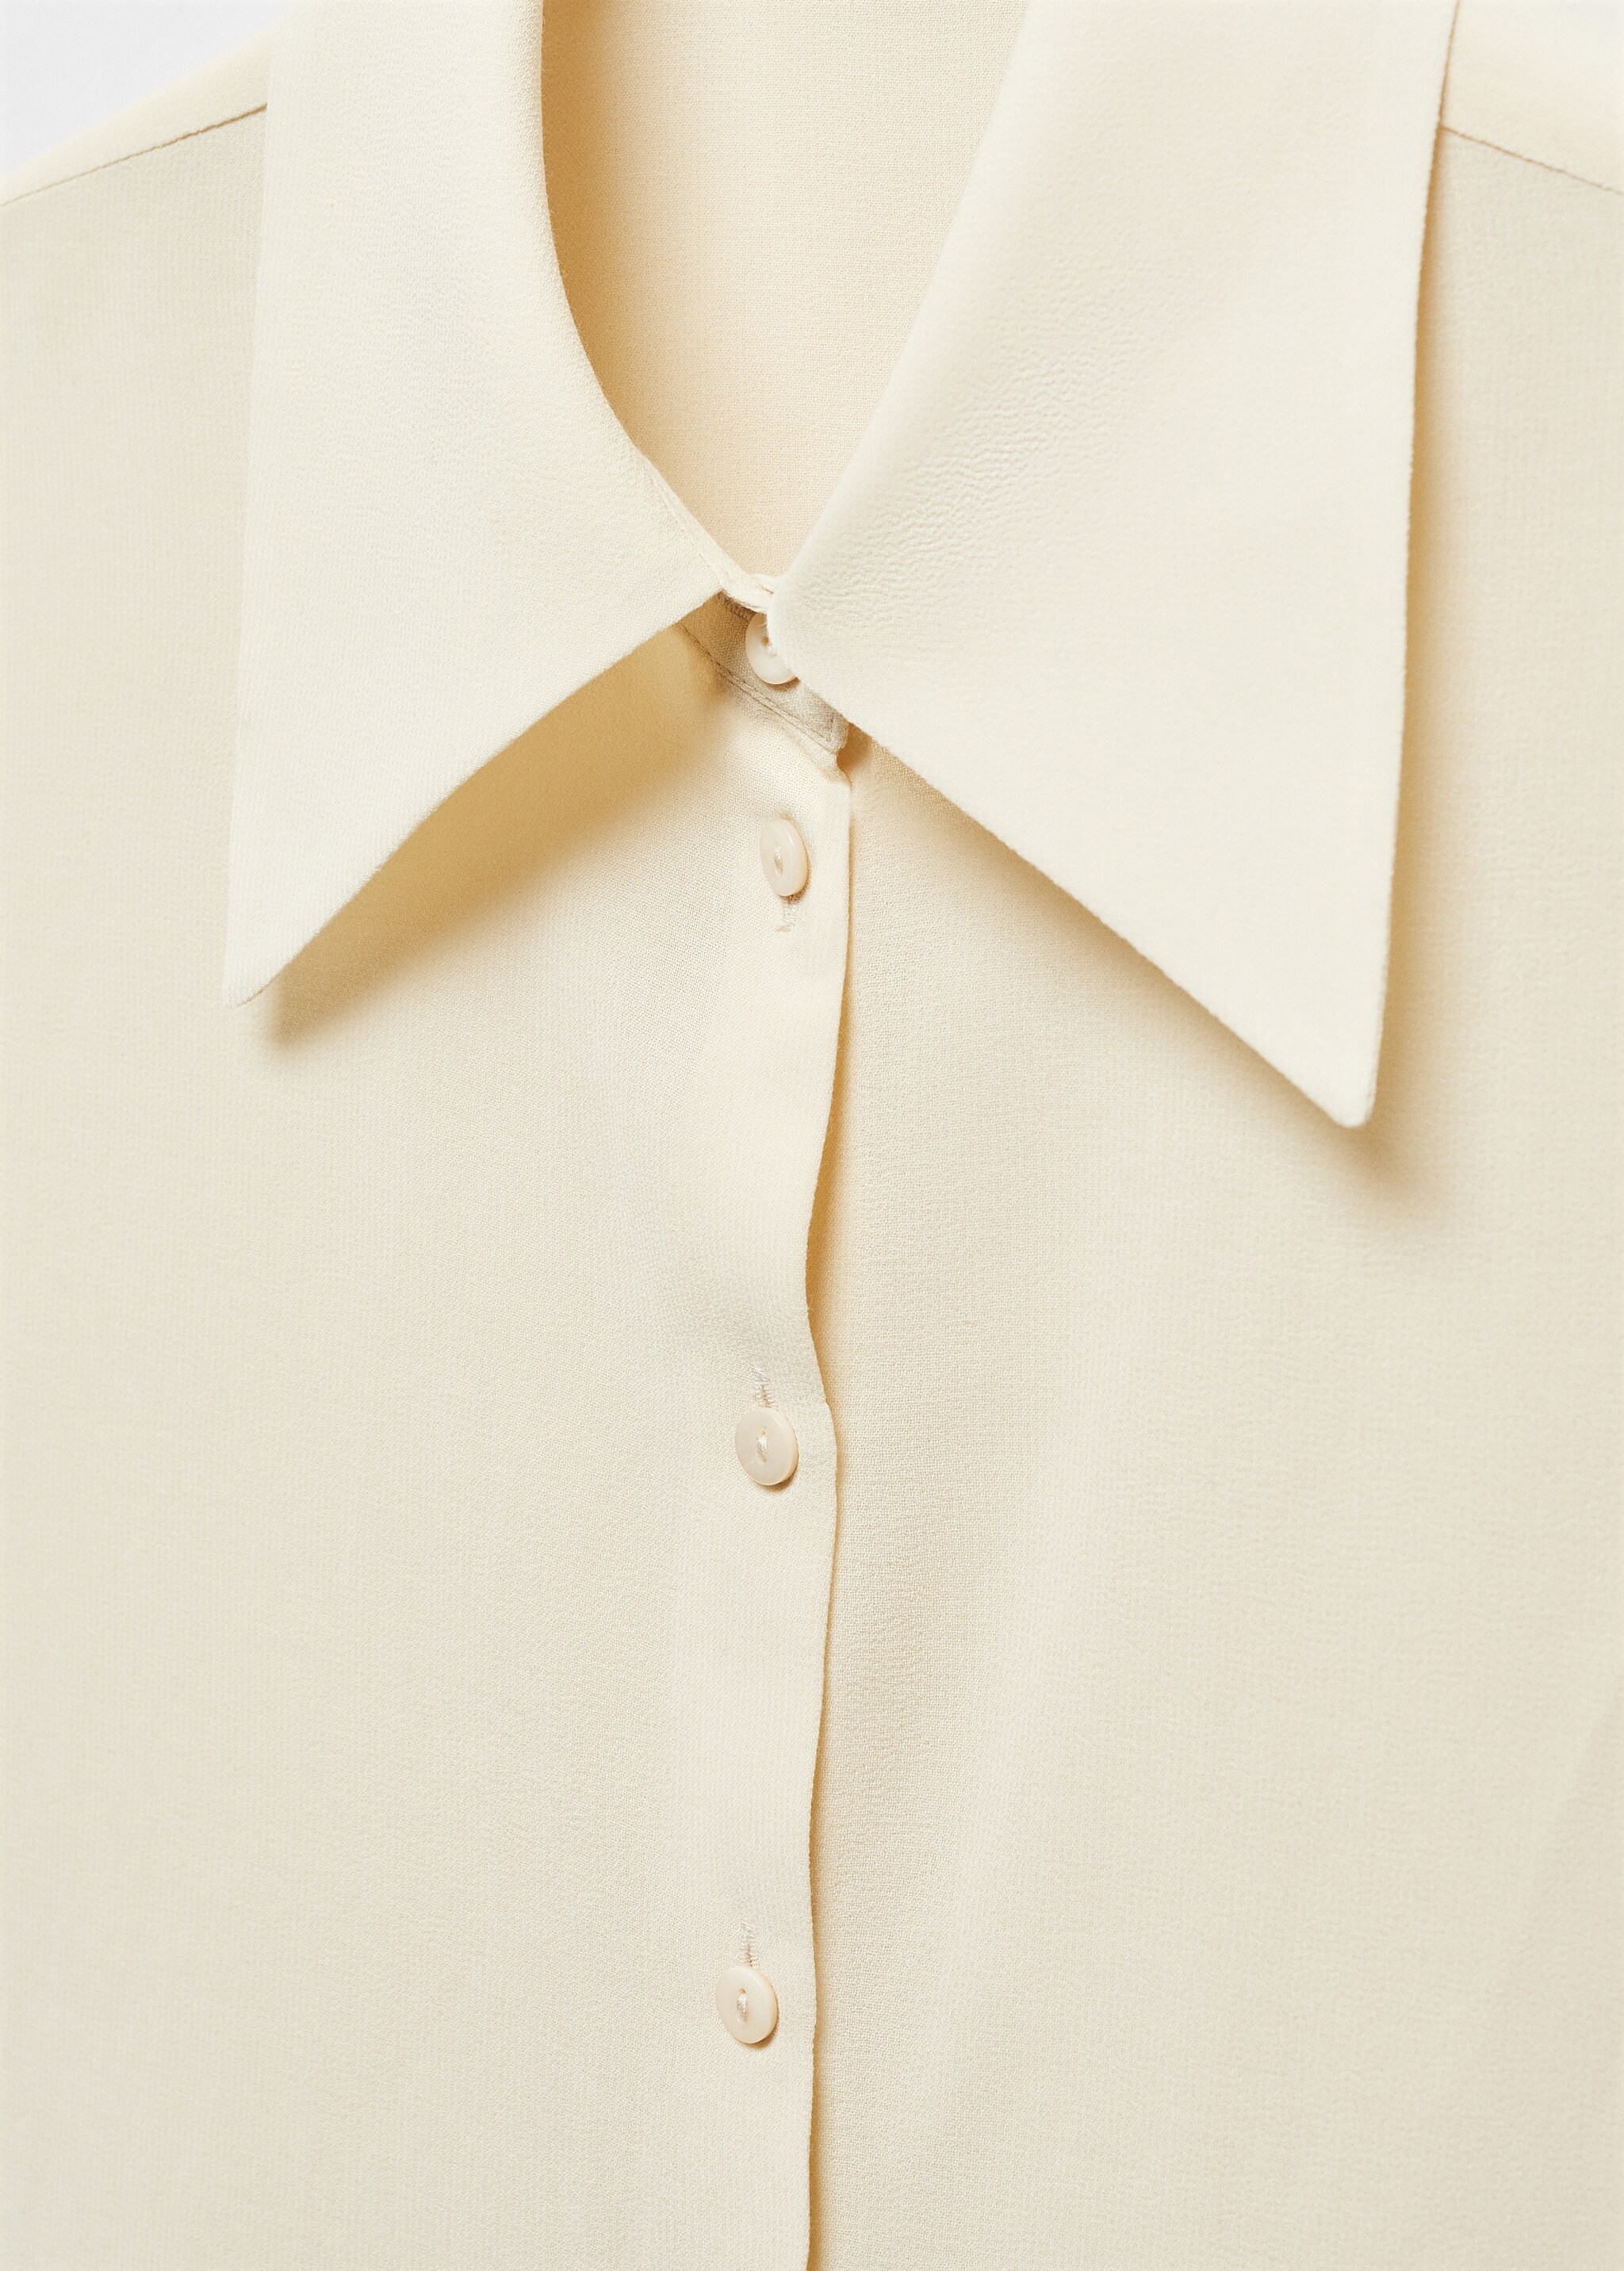 Buttoned flowy shirt - Details of the article 8